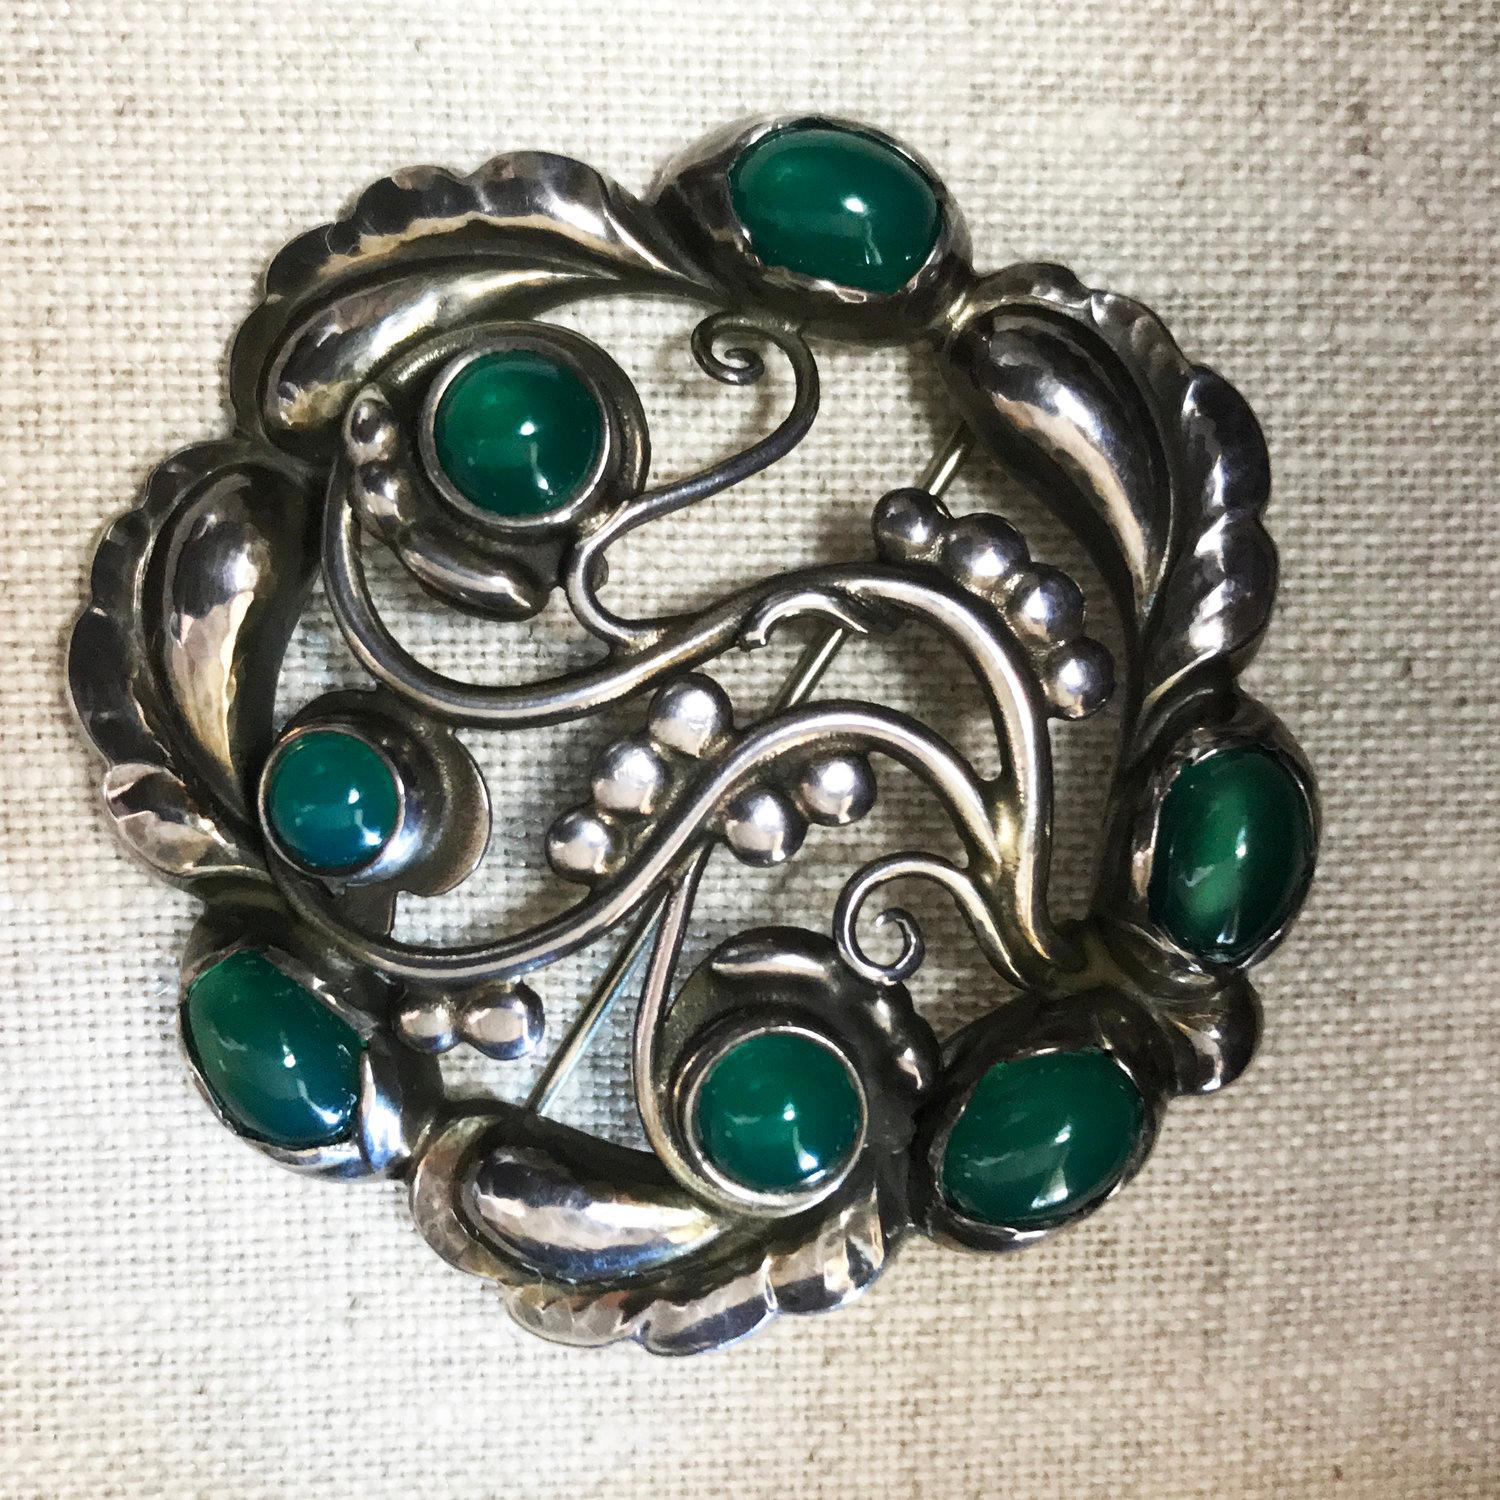 Georg Jensen Sterling Silver Brooch with Chrysoprase No. 159 In Excellent Condition For Sale In San Francisco, CA